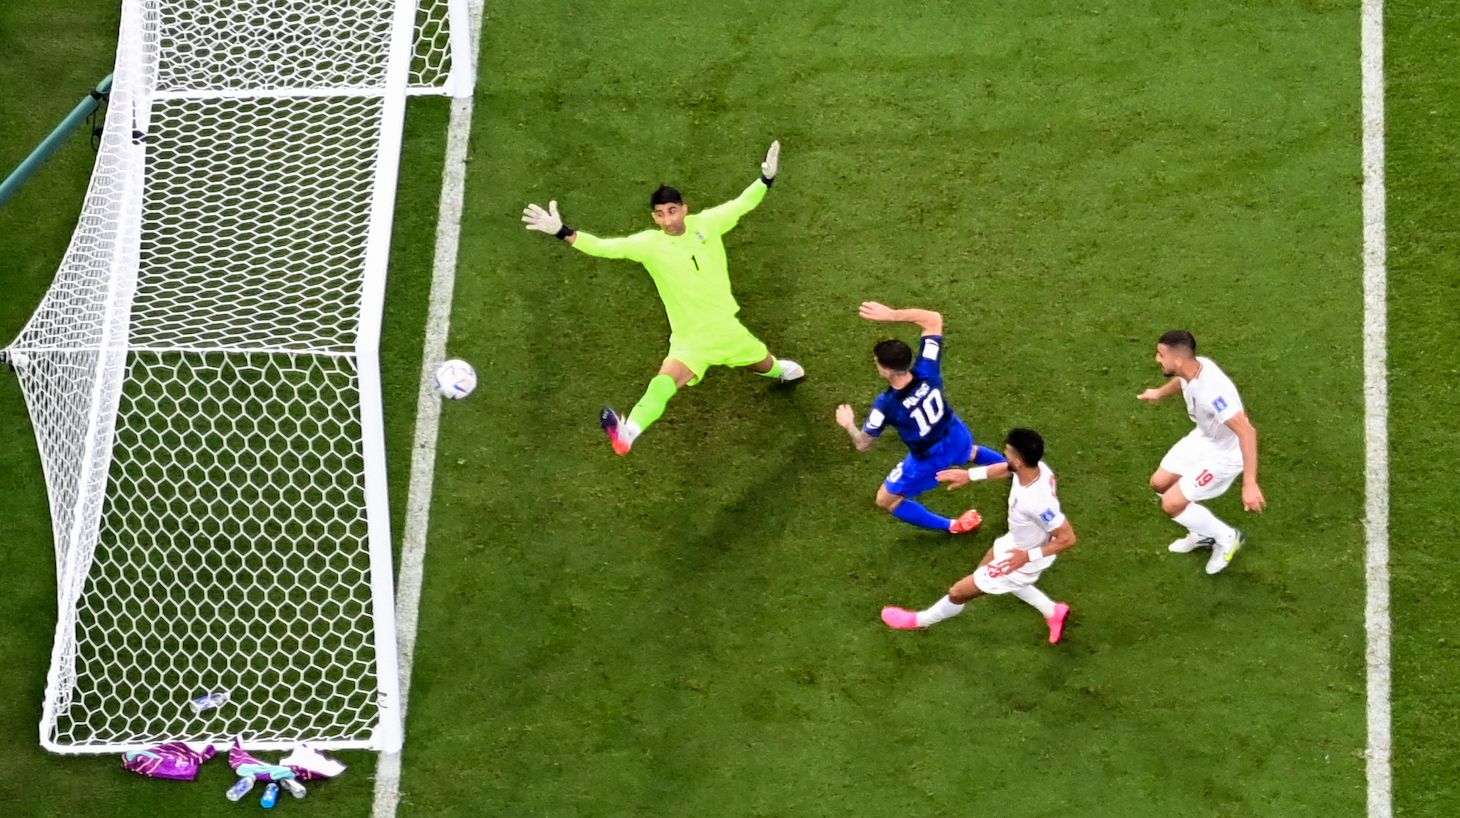 USA's forward #10 Christian Pulisic scores his team's first goal past Iran's goalkeeper #01 Alireza Beiranvand during the Qatar 2022 World Cup Group B football match between Iran and USA at the Al-Thumama Stadium in Doha on November 29, 2022.